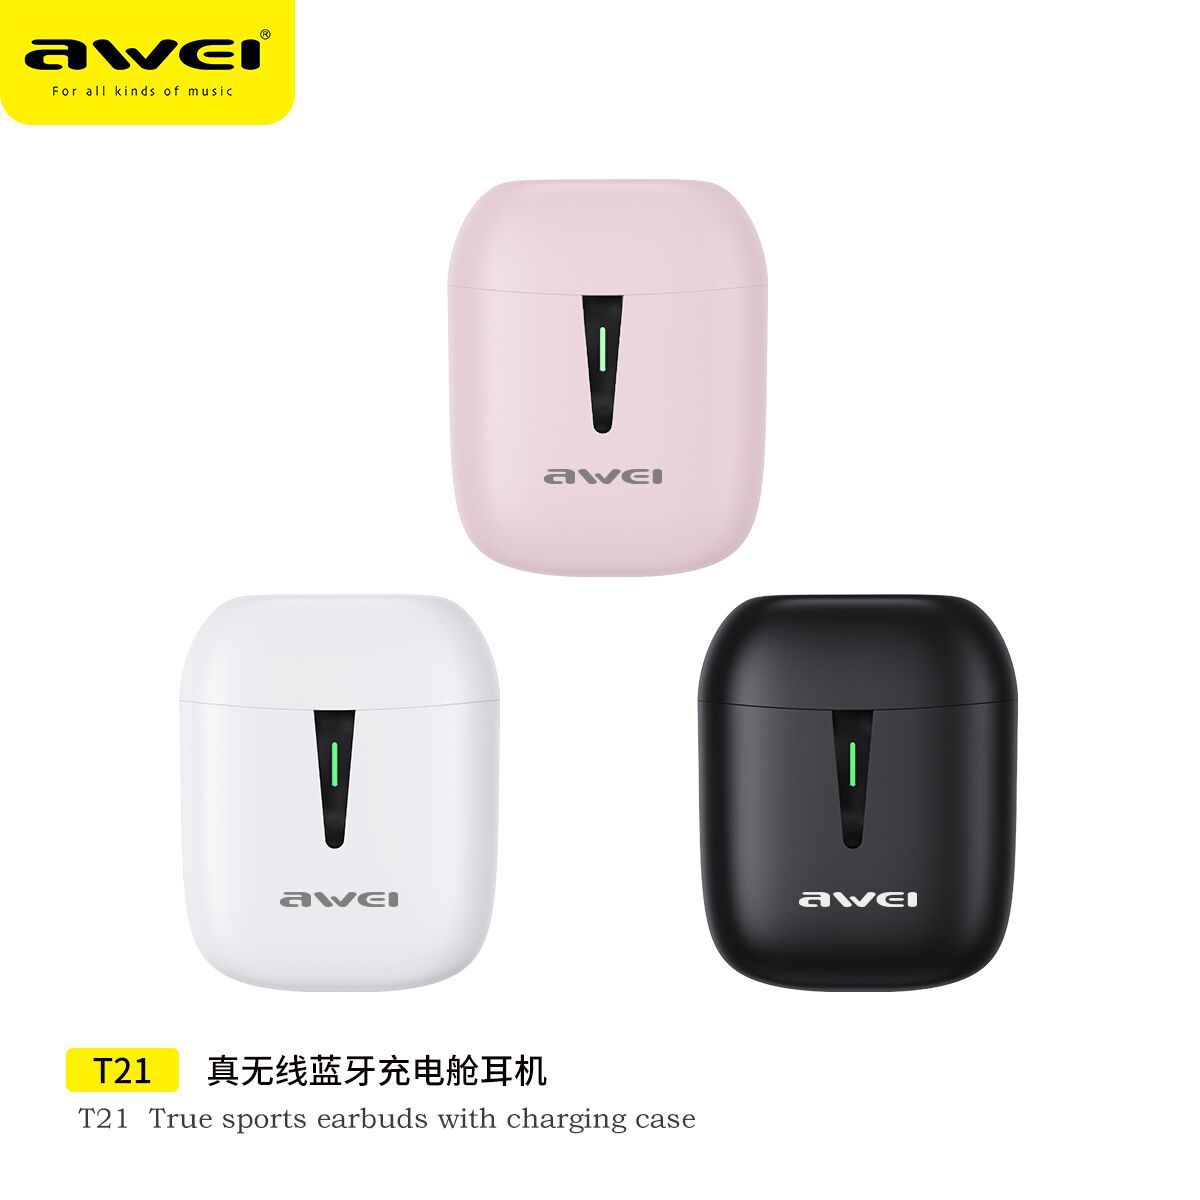 Batch AWEI/ Using Bluetooth 5.0 Wireless headset T21 Tricolor Cross border new pattern delay Fast charging headset